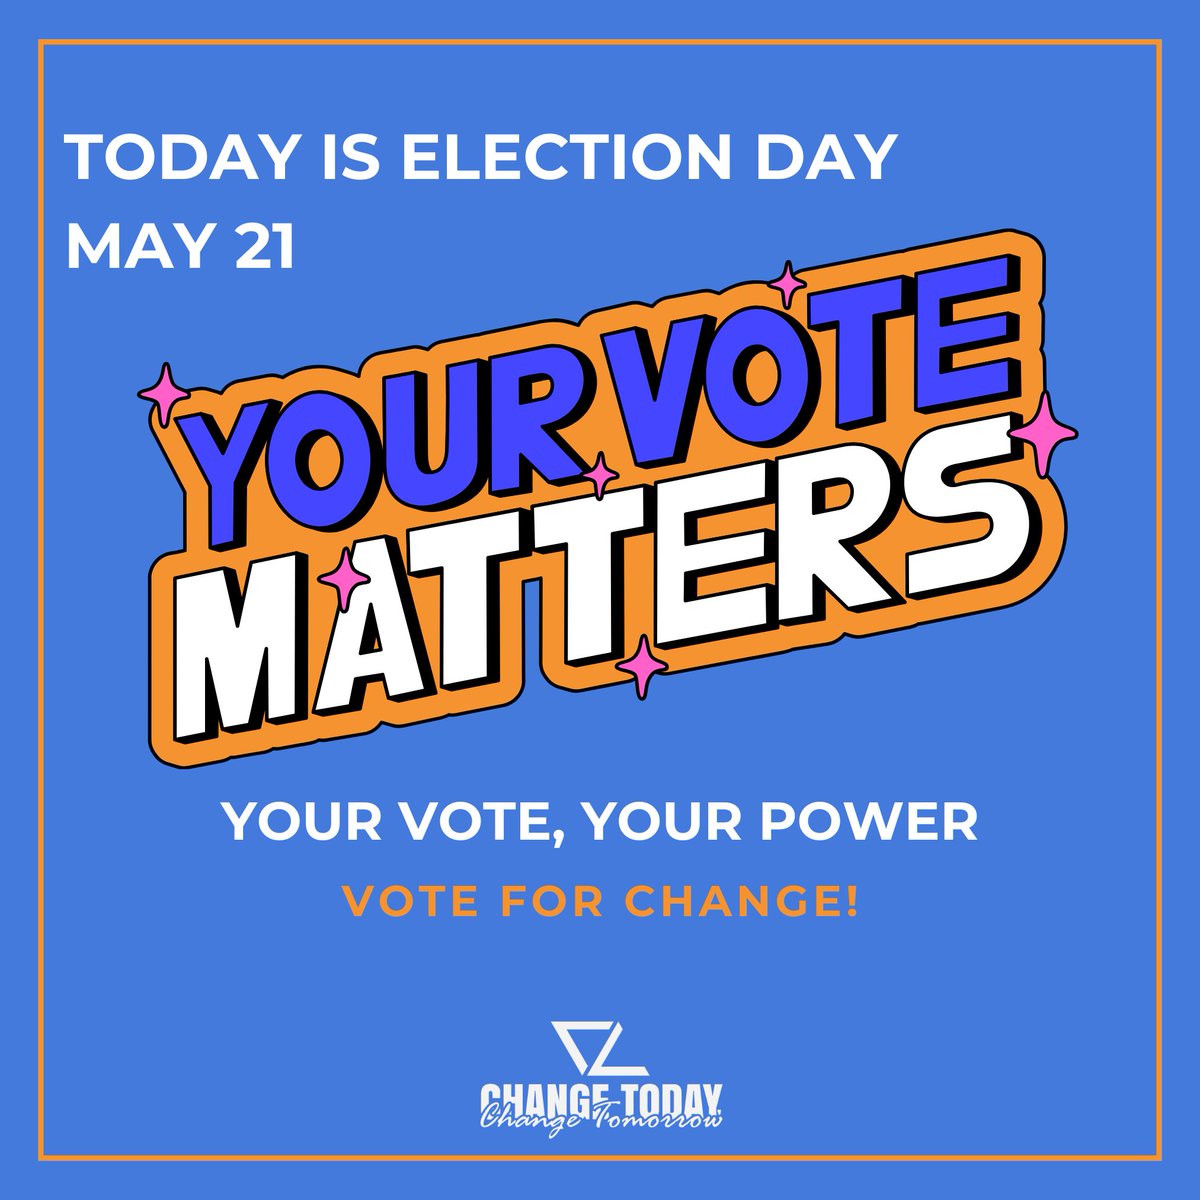 Your vote matters! Today, May 21, is Election Day! Find your polling location and more at govote.ky.gov